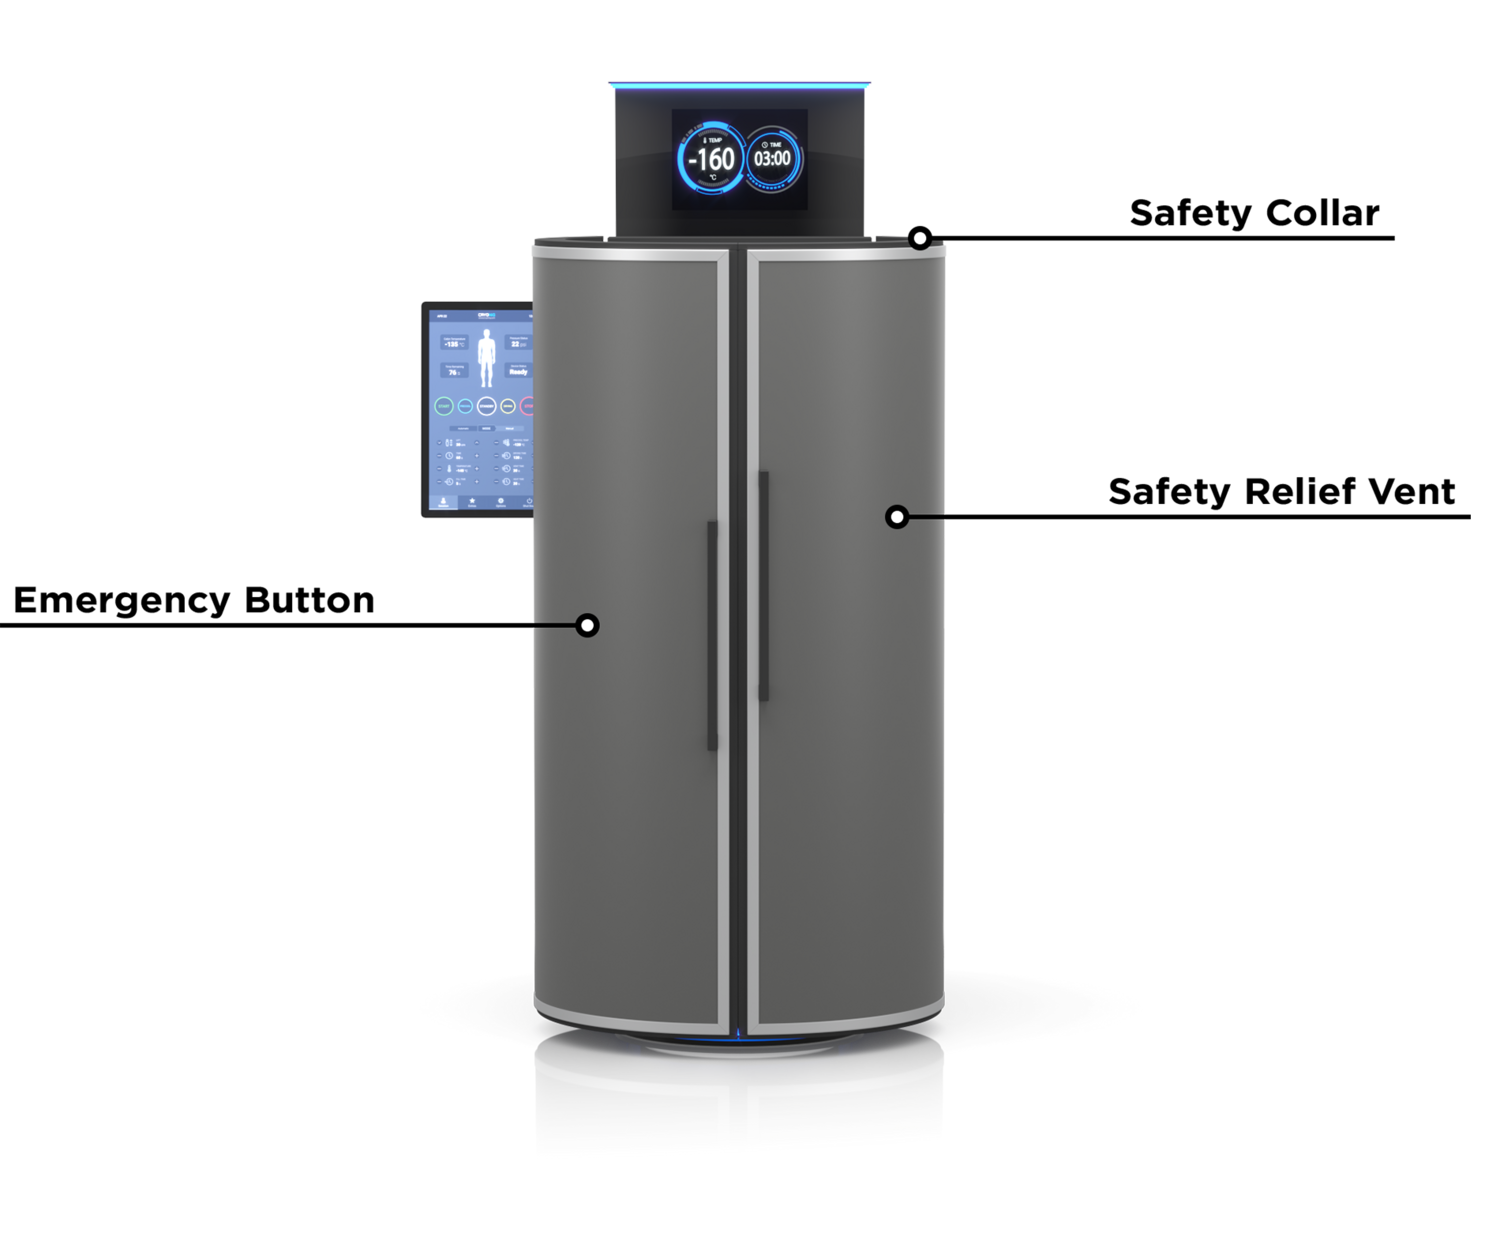 Cryotherapy unit with list of built-in safety features in Operation